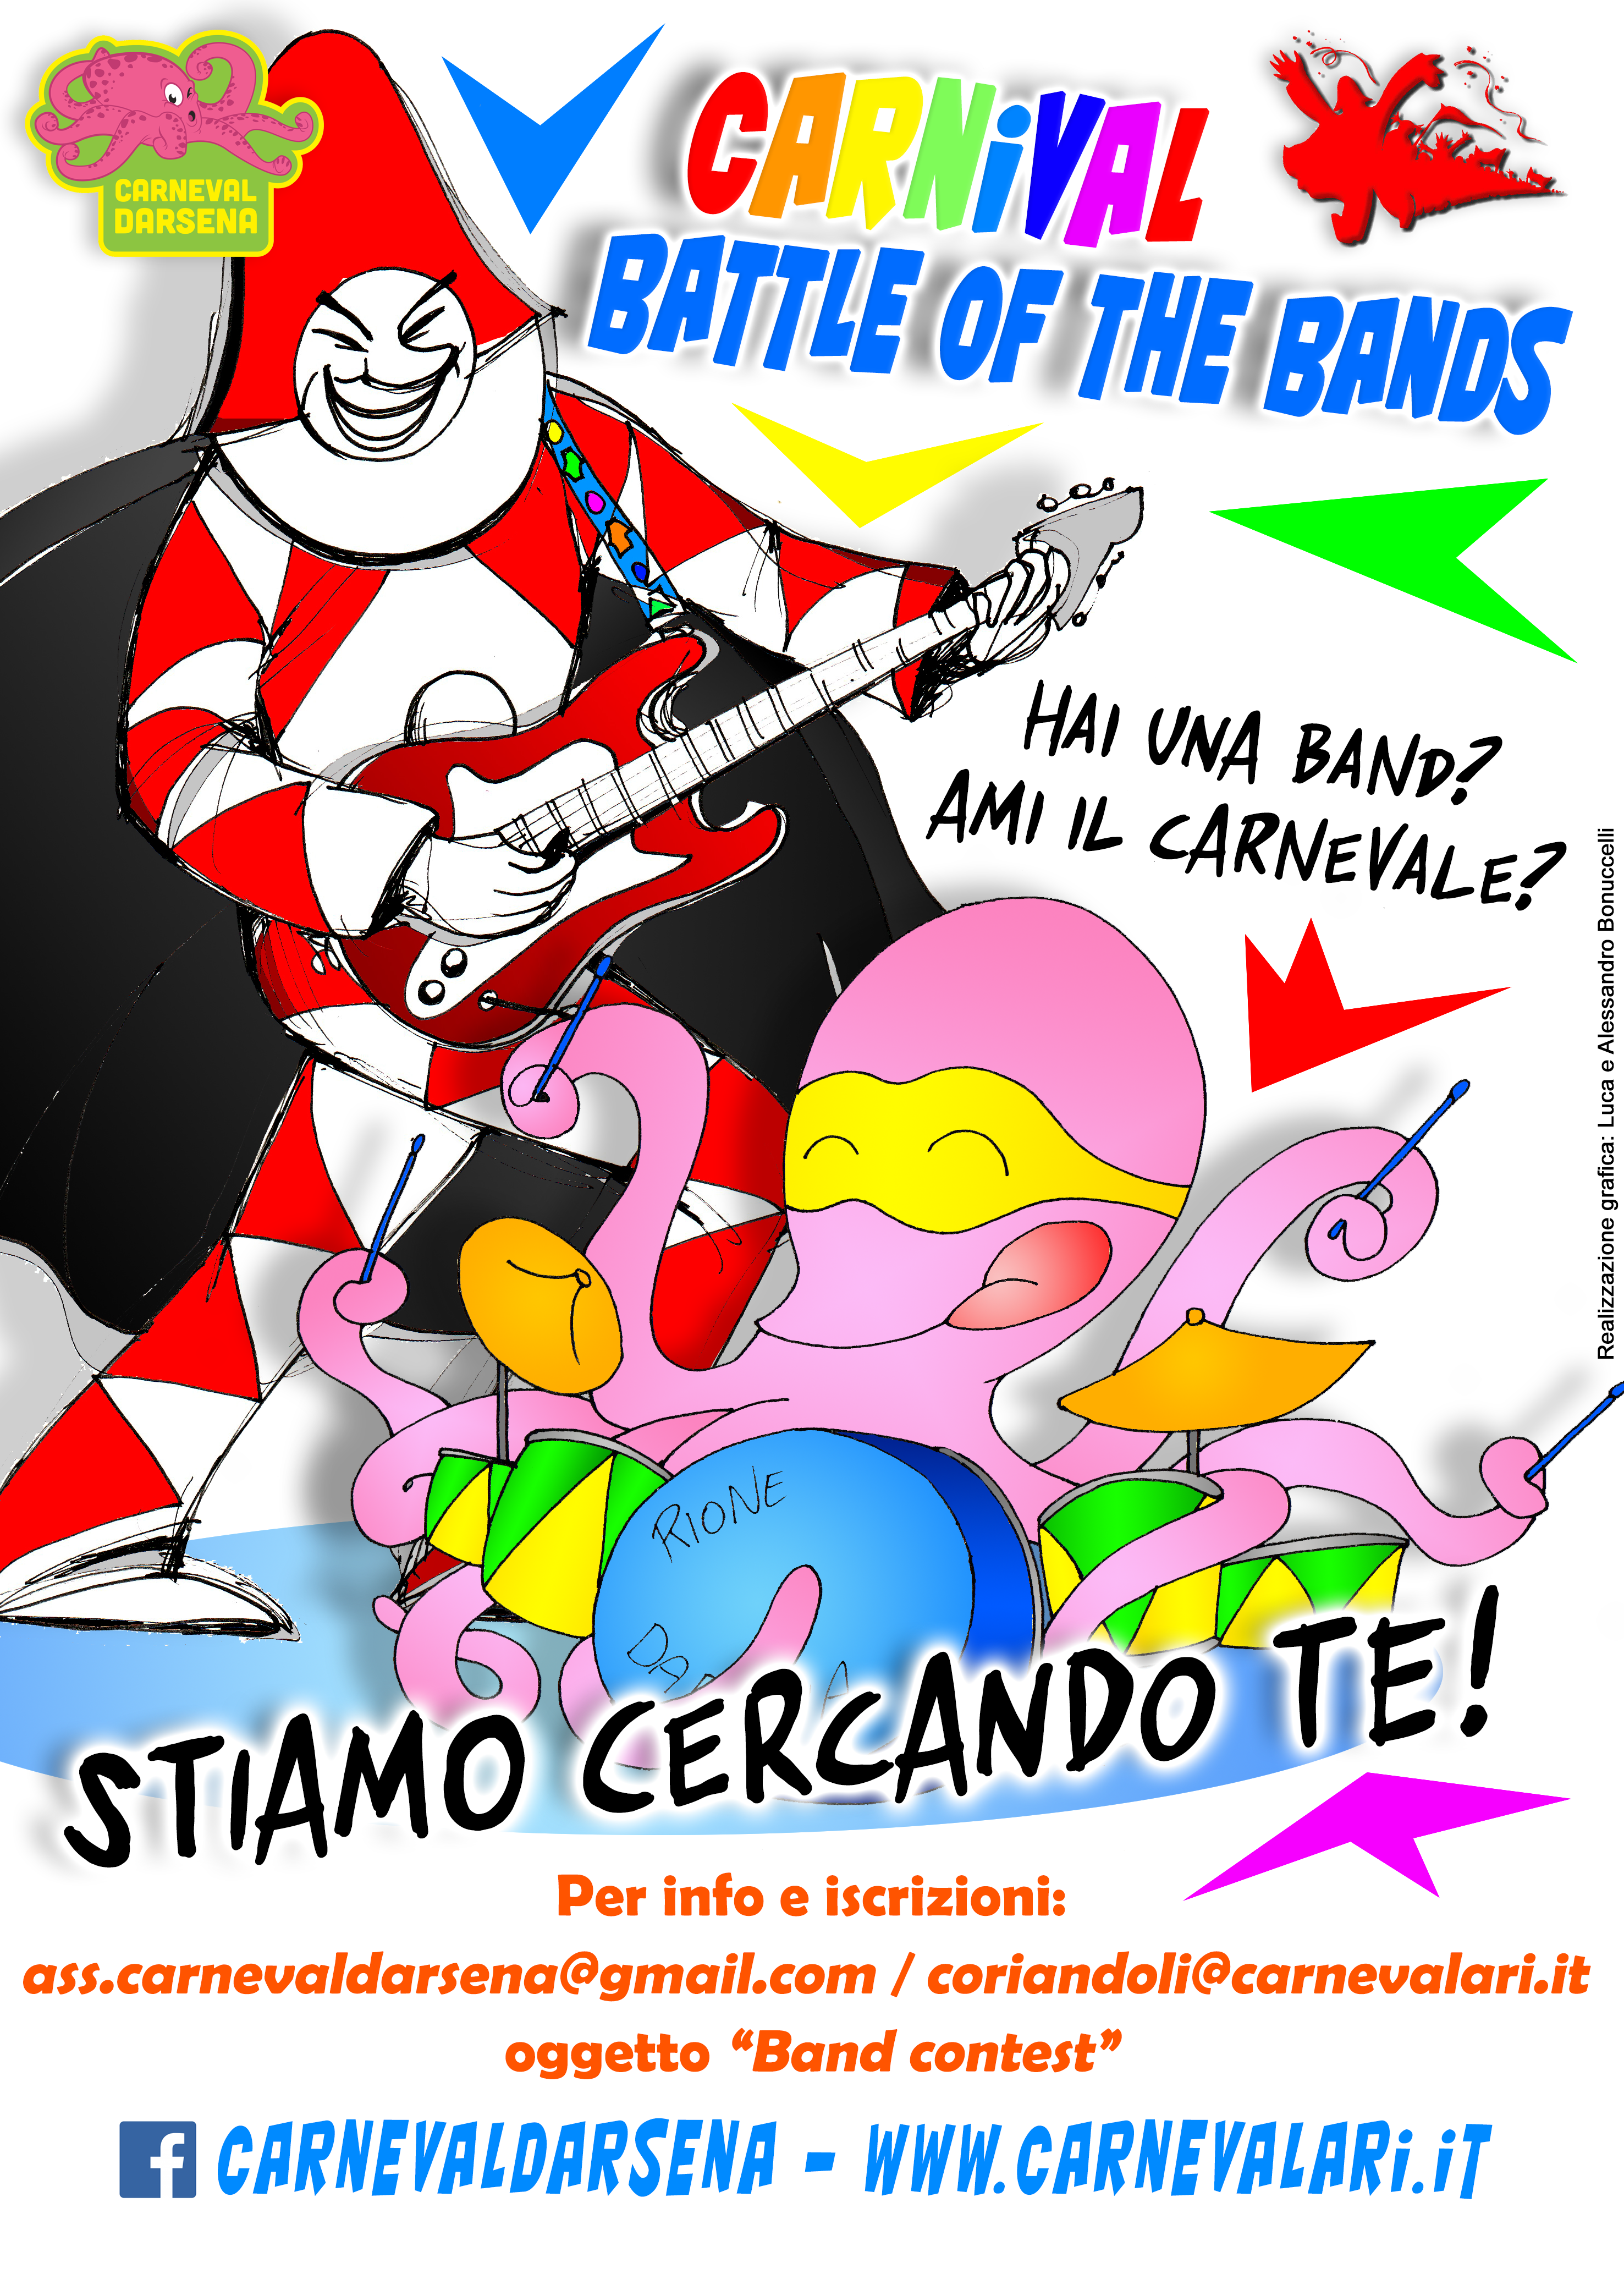 Arriva Carnival Battle of the Bands!